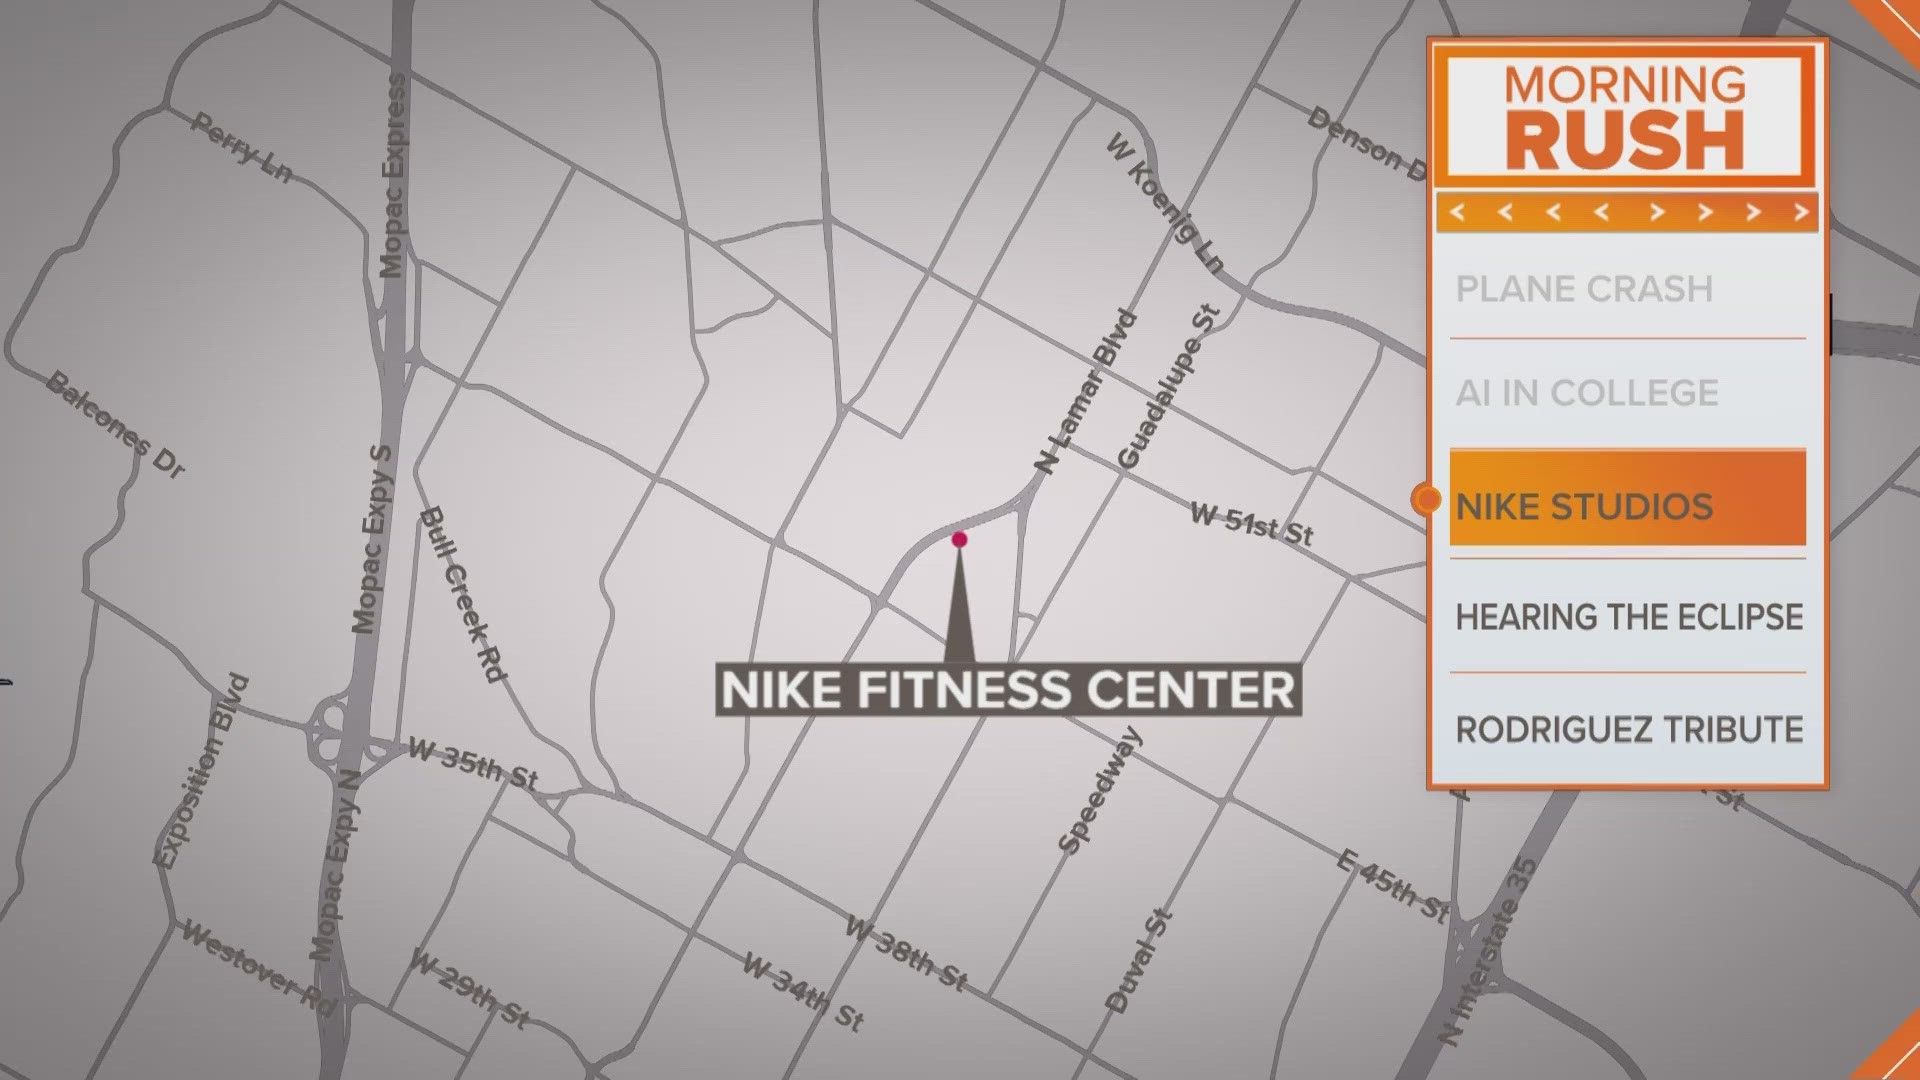 Nike plans to open its first fitness center outside California right here in Austin.